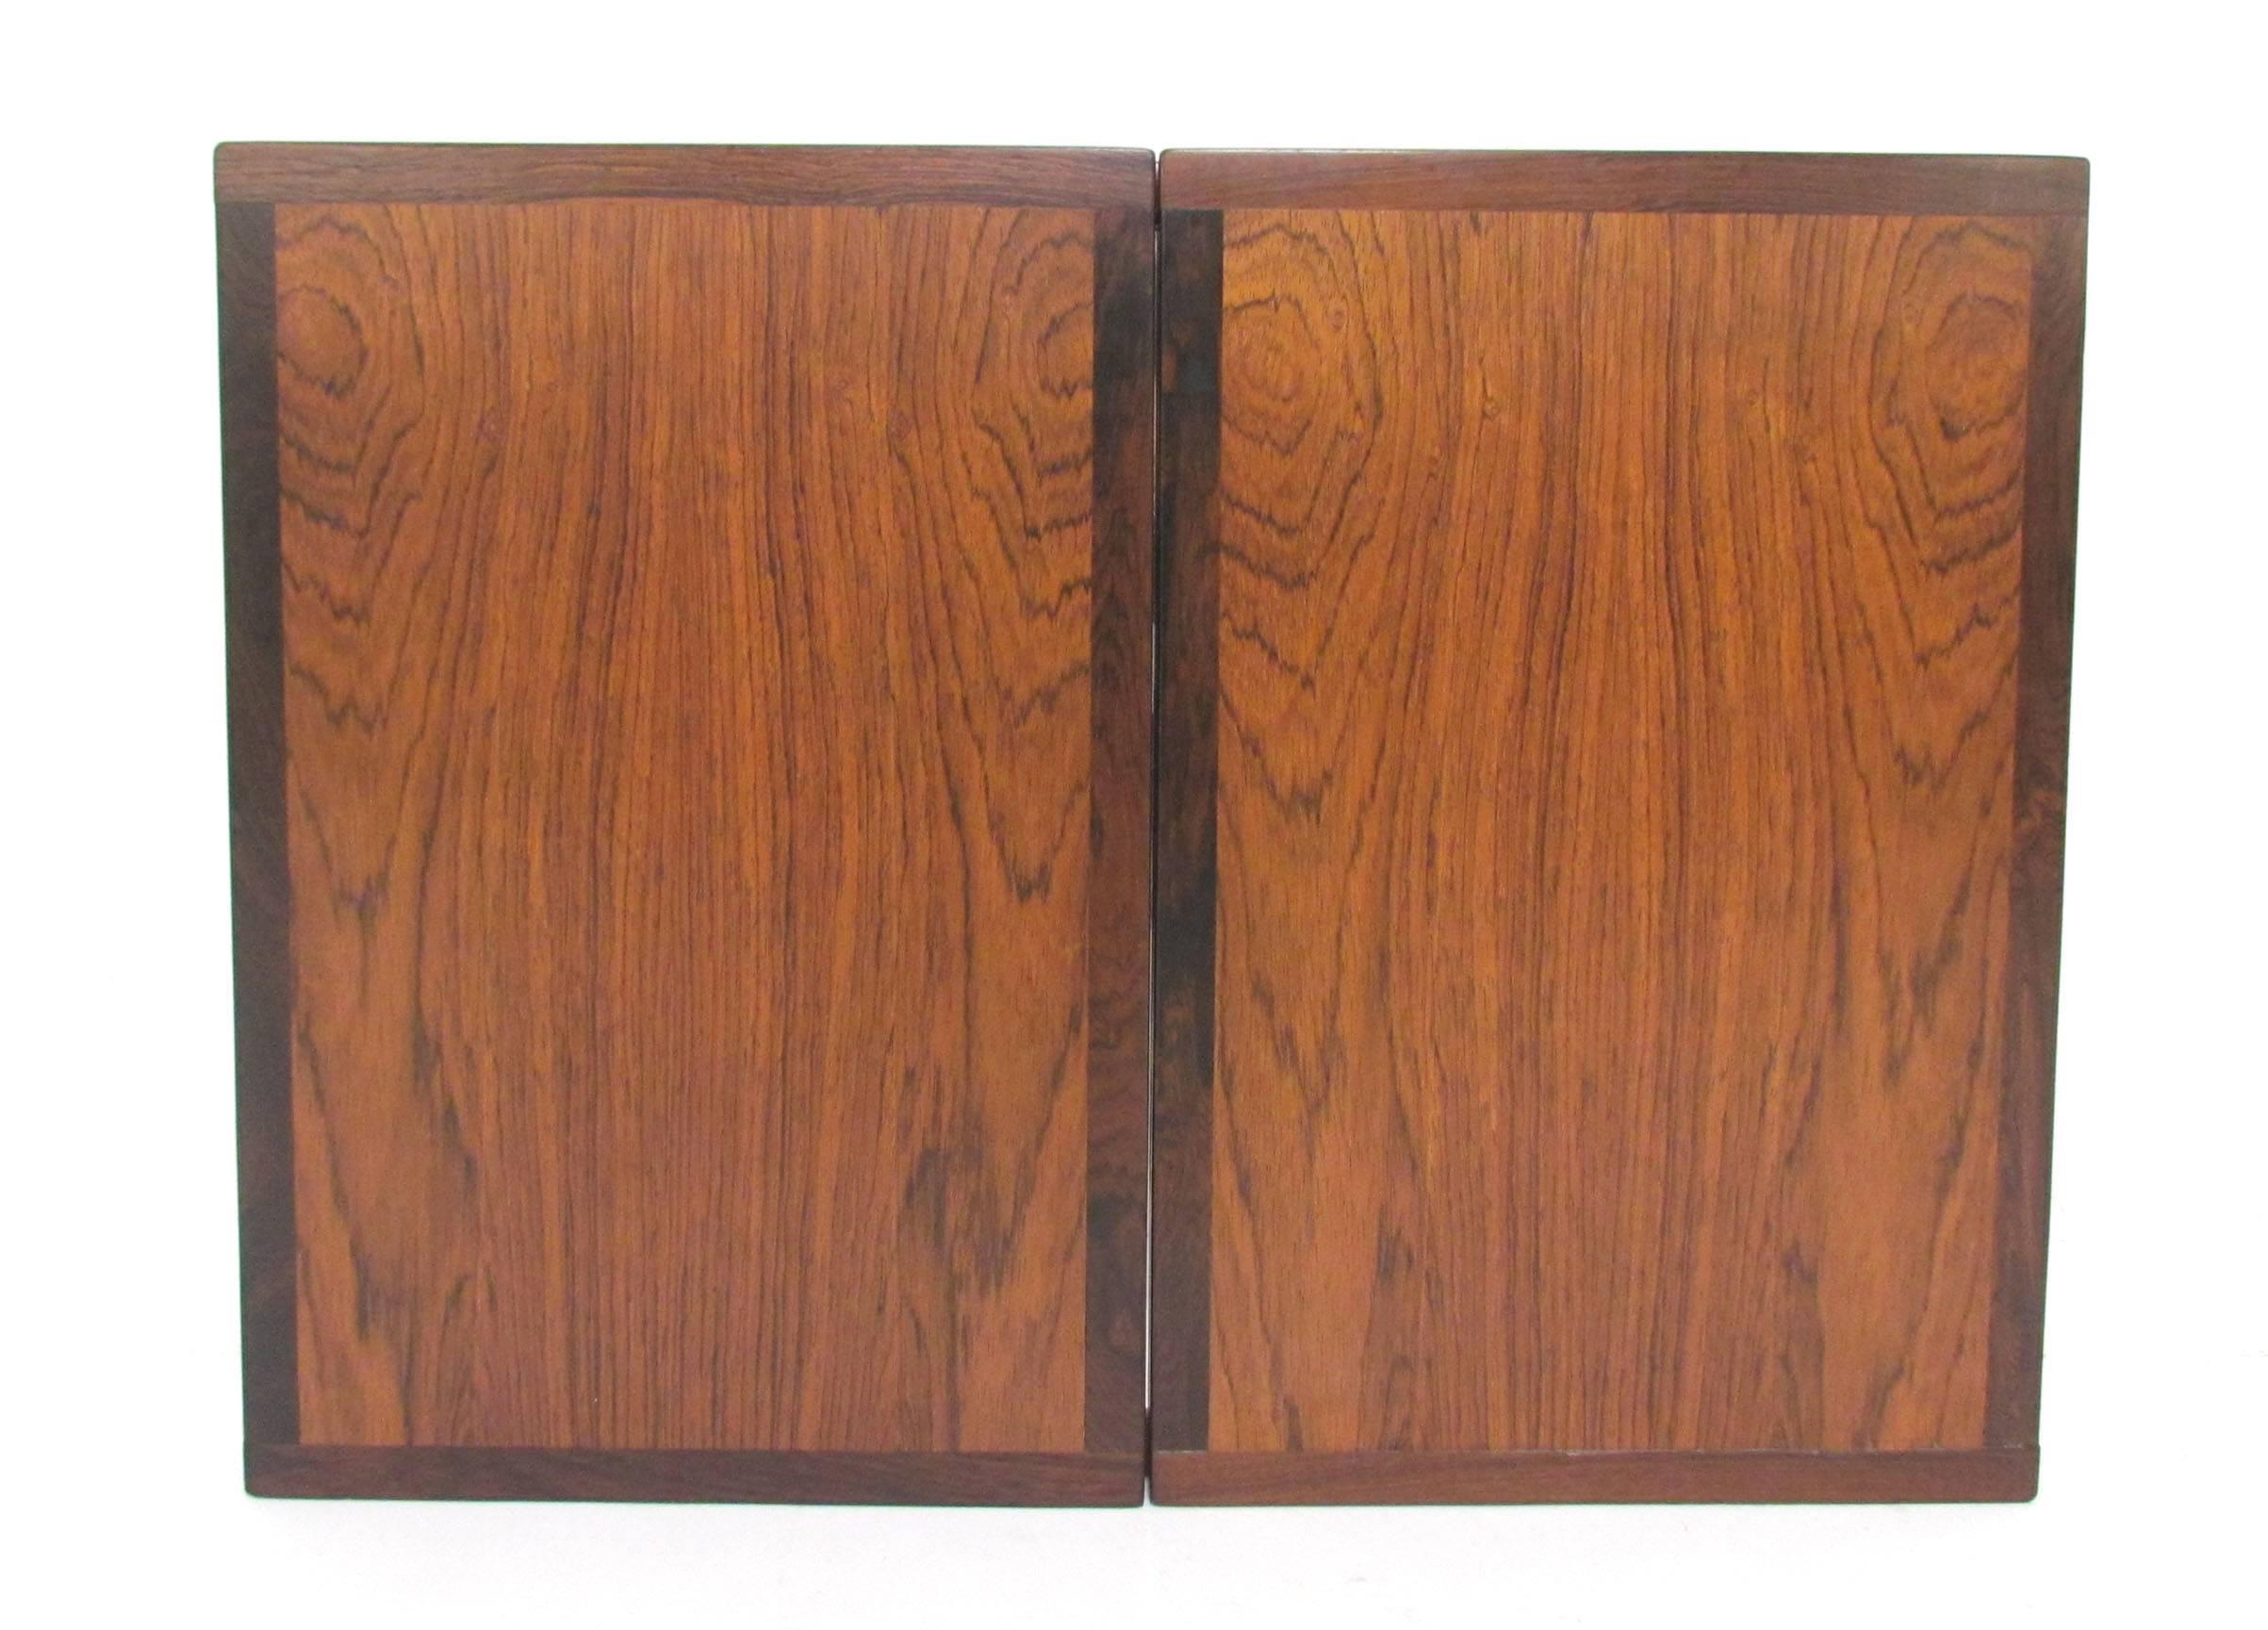 Wall mounting mirror with hinged side panels in Brazilian rosewood, designed by Kai Kristiansen for Aksel Kjersgaard, Denmark, ca. 1960s.   When closed, the beauty of the rosewood is even more evident.

When closed, this measures 22.75